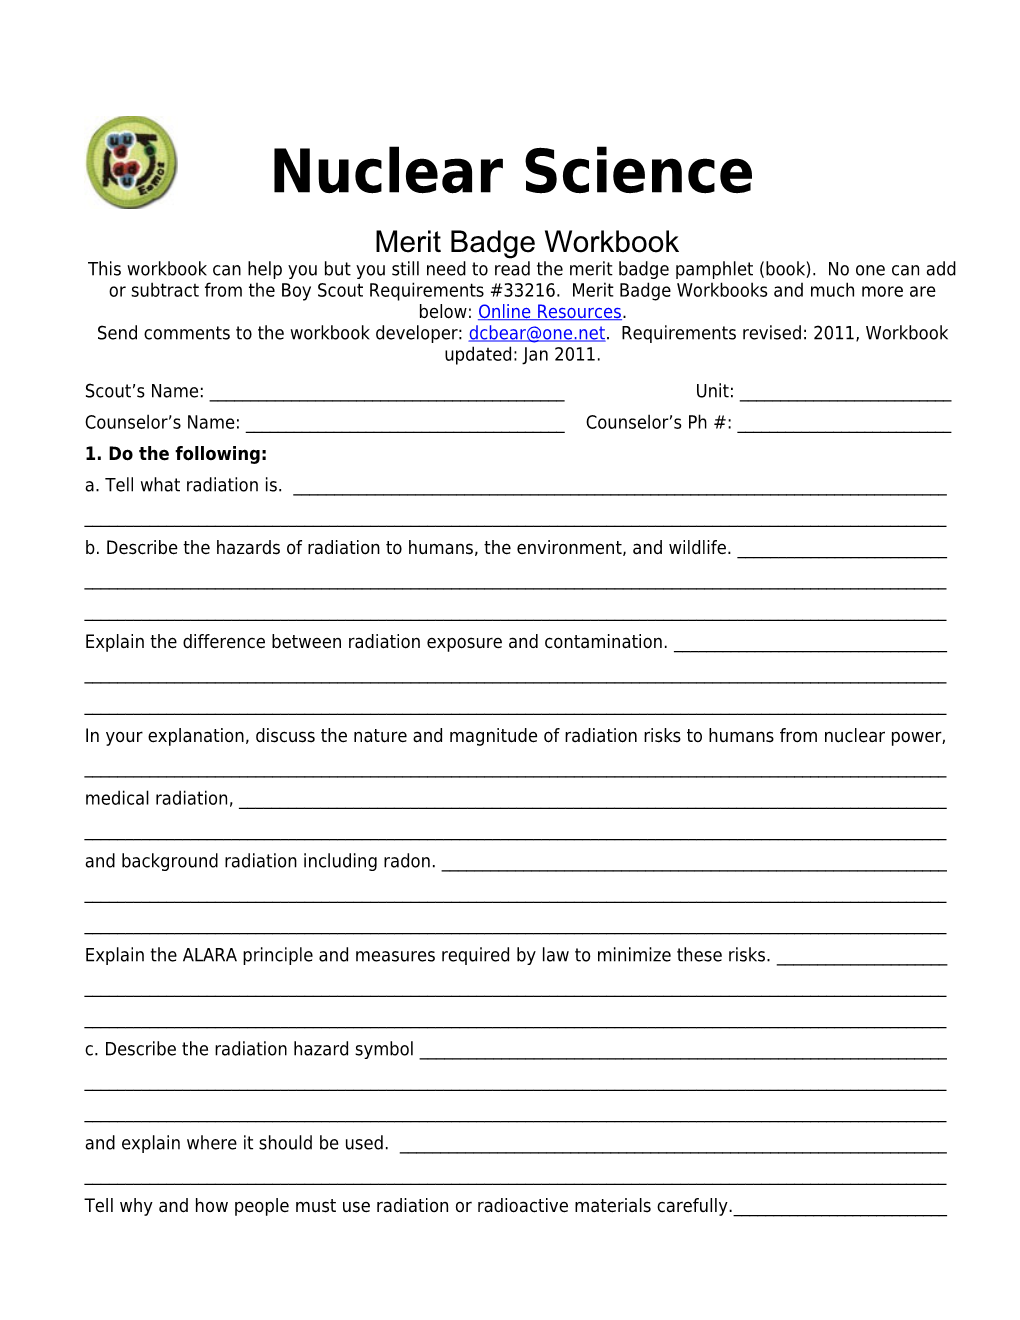 Nuclear Science P. 1 Merit Badge Workbook Scout's Name: ______